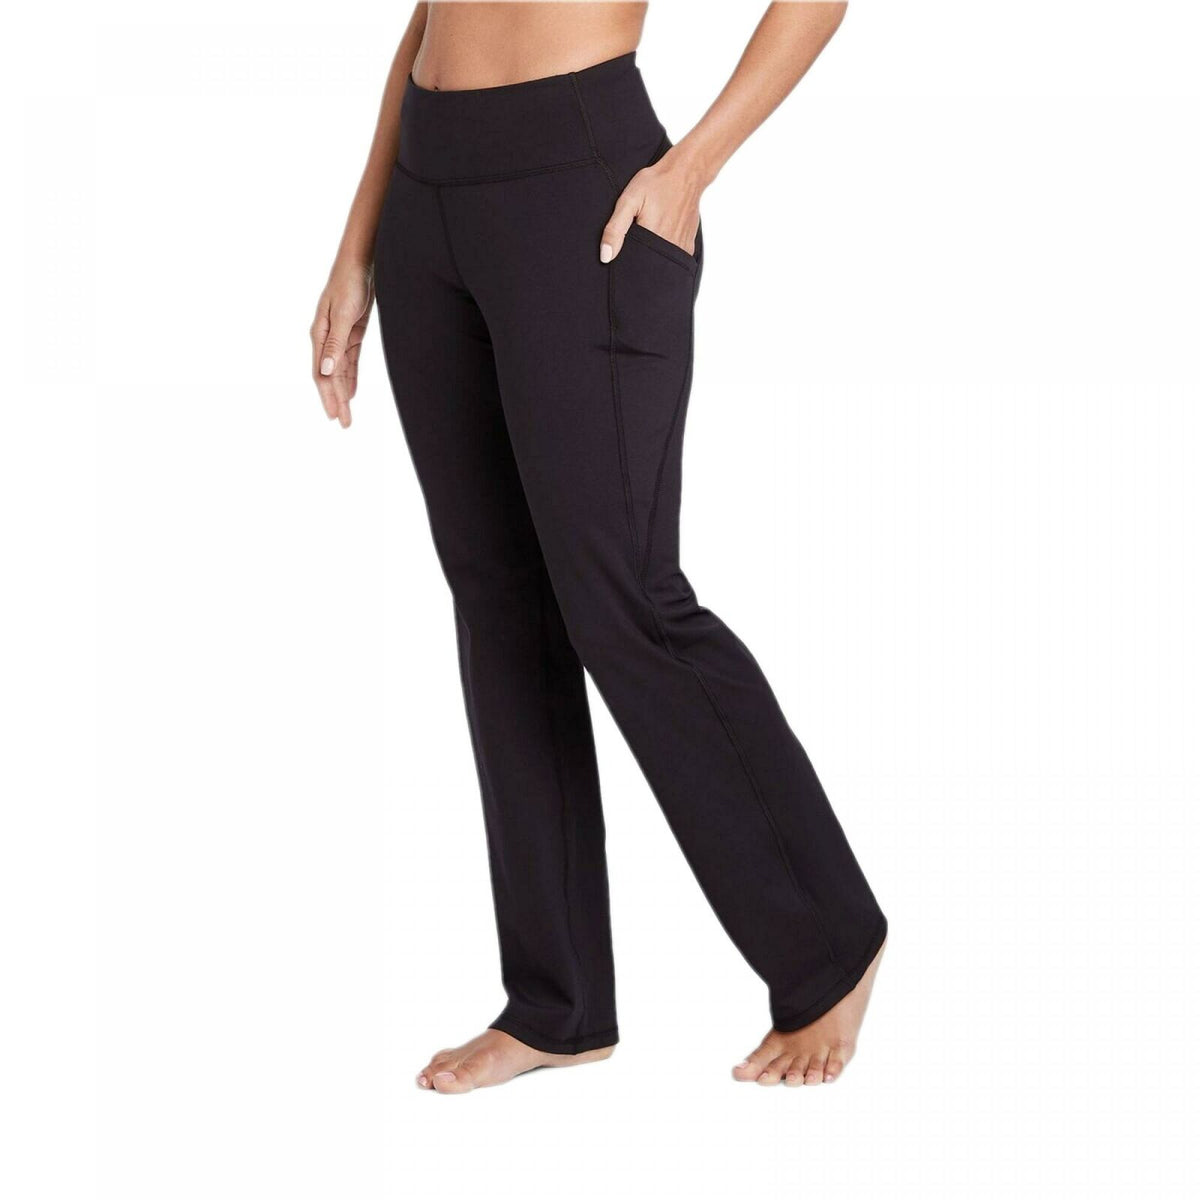 Women's Contour Curvy High-Rise Leggings with Power Waist All in Motion  Black XS